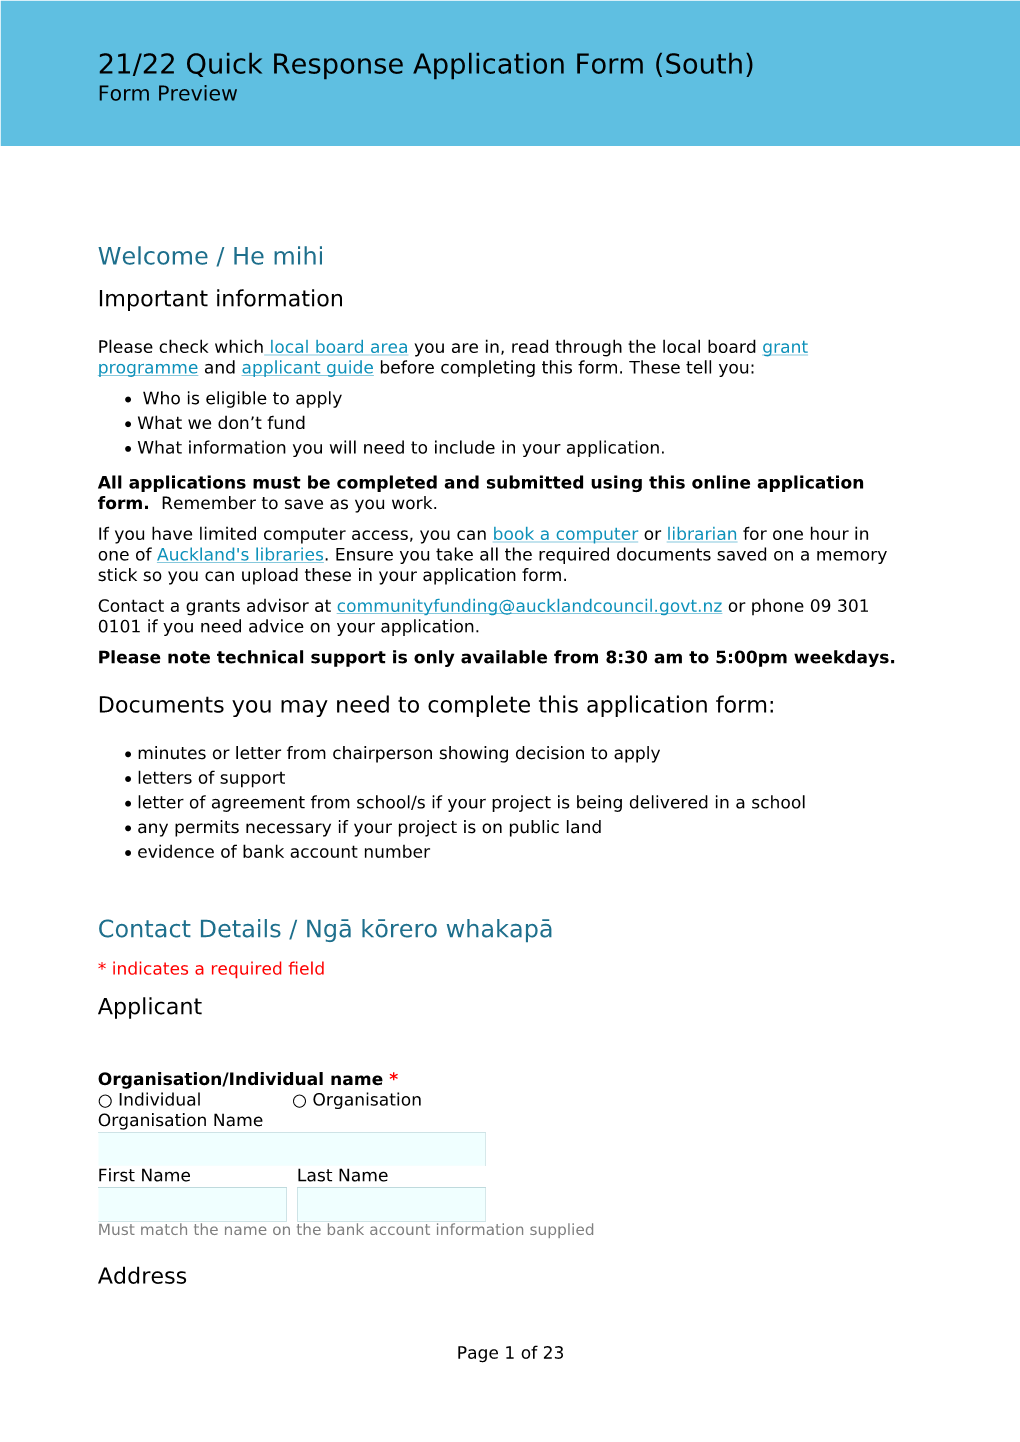 21/22 Quick Response Application Form (South) Form Preview